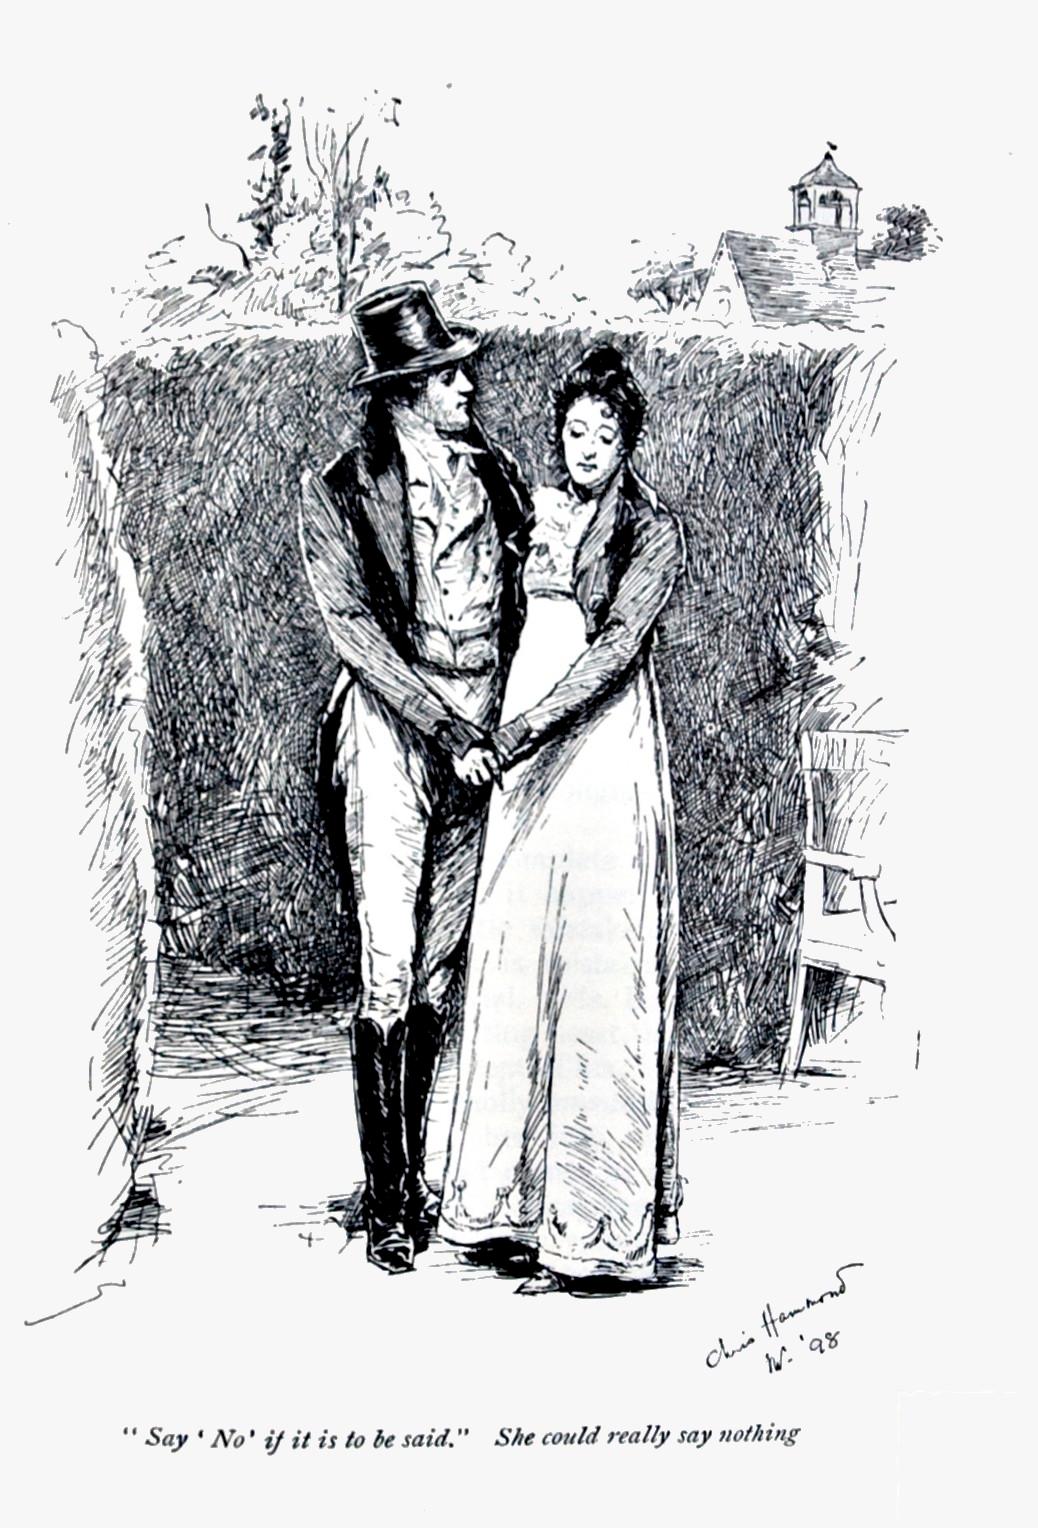 Mr Knightley’s proposal to Emma. An illustration by Chris Hammond in the 1898 edition of “Emma.” (Public Domain)